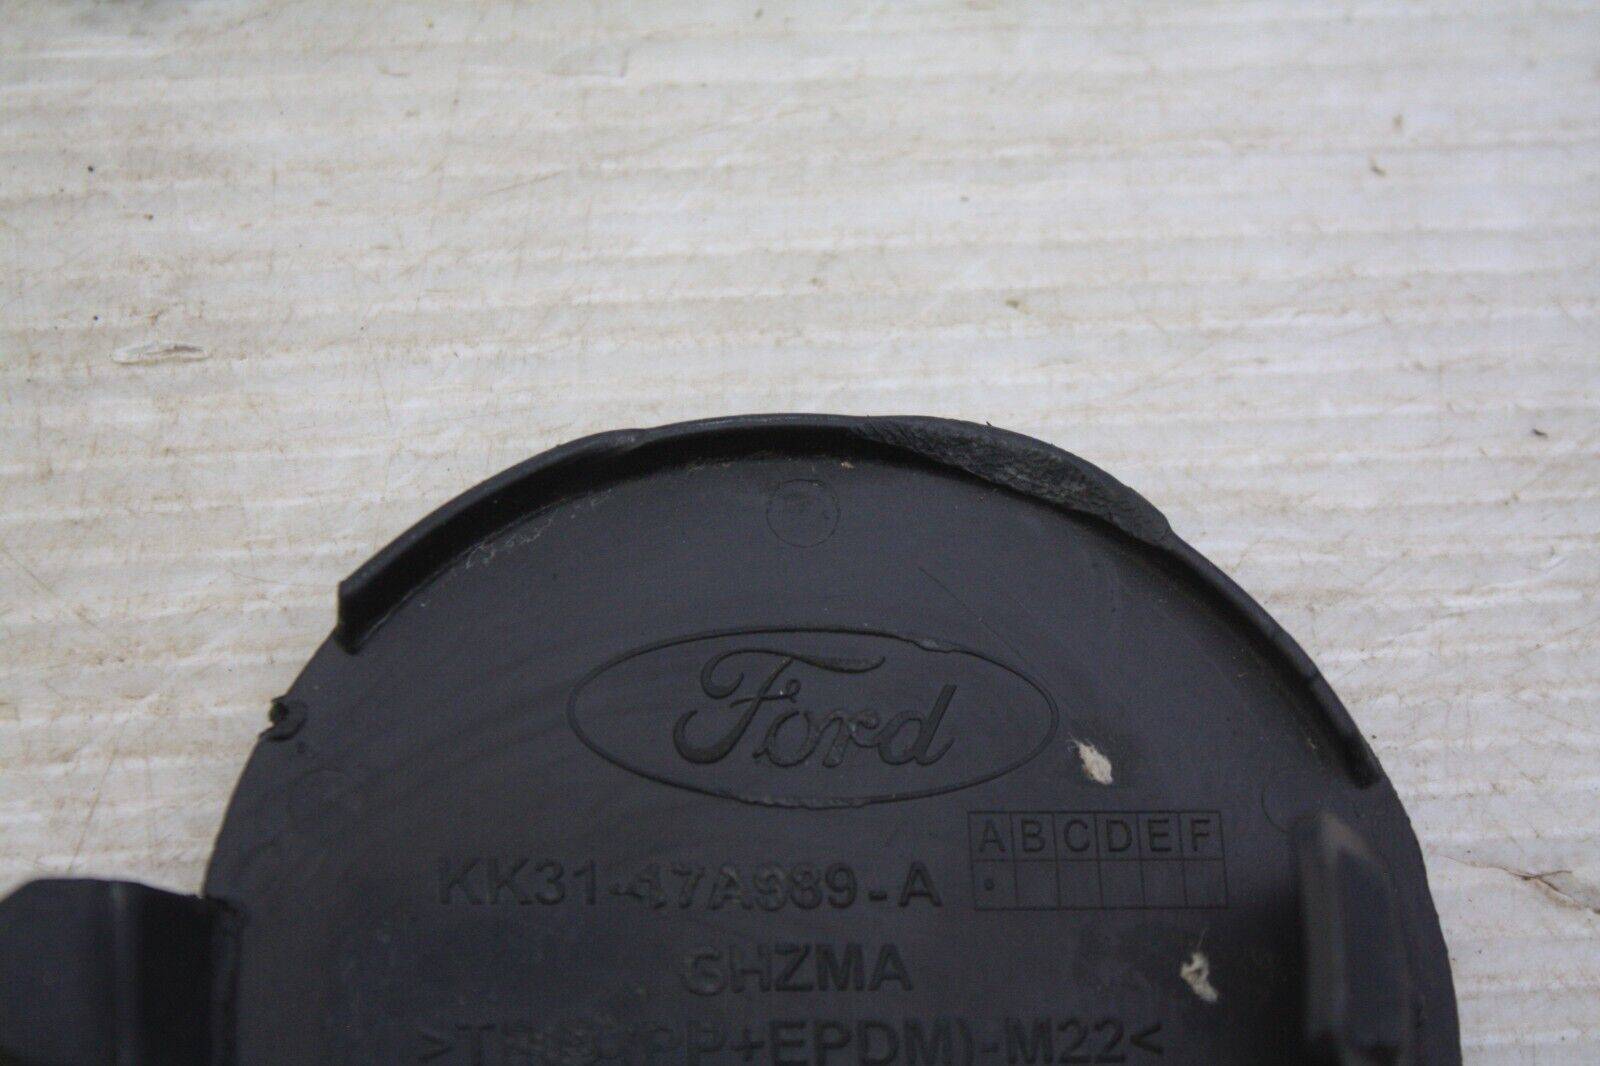 Ford-Transit-Front-Bumper-Tow-Cover-2019-ON-KK31-17A989-A-Genuine-176137188660-8